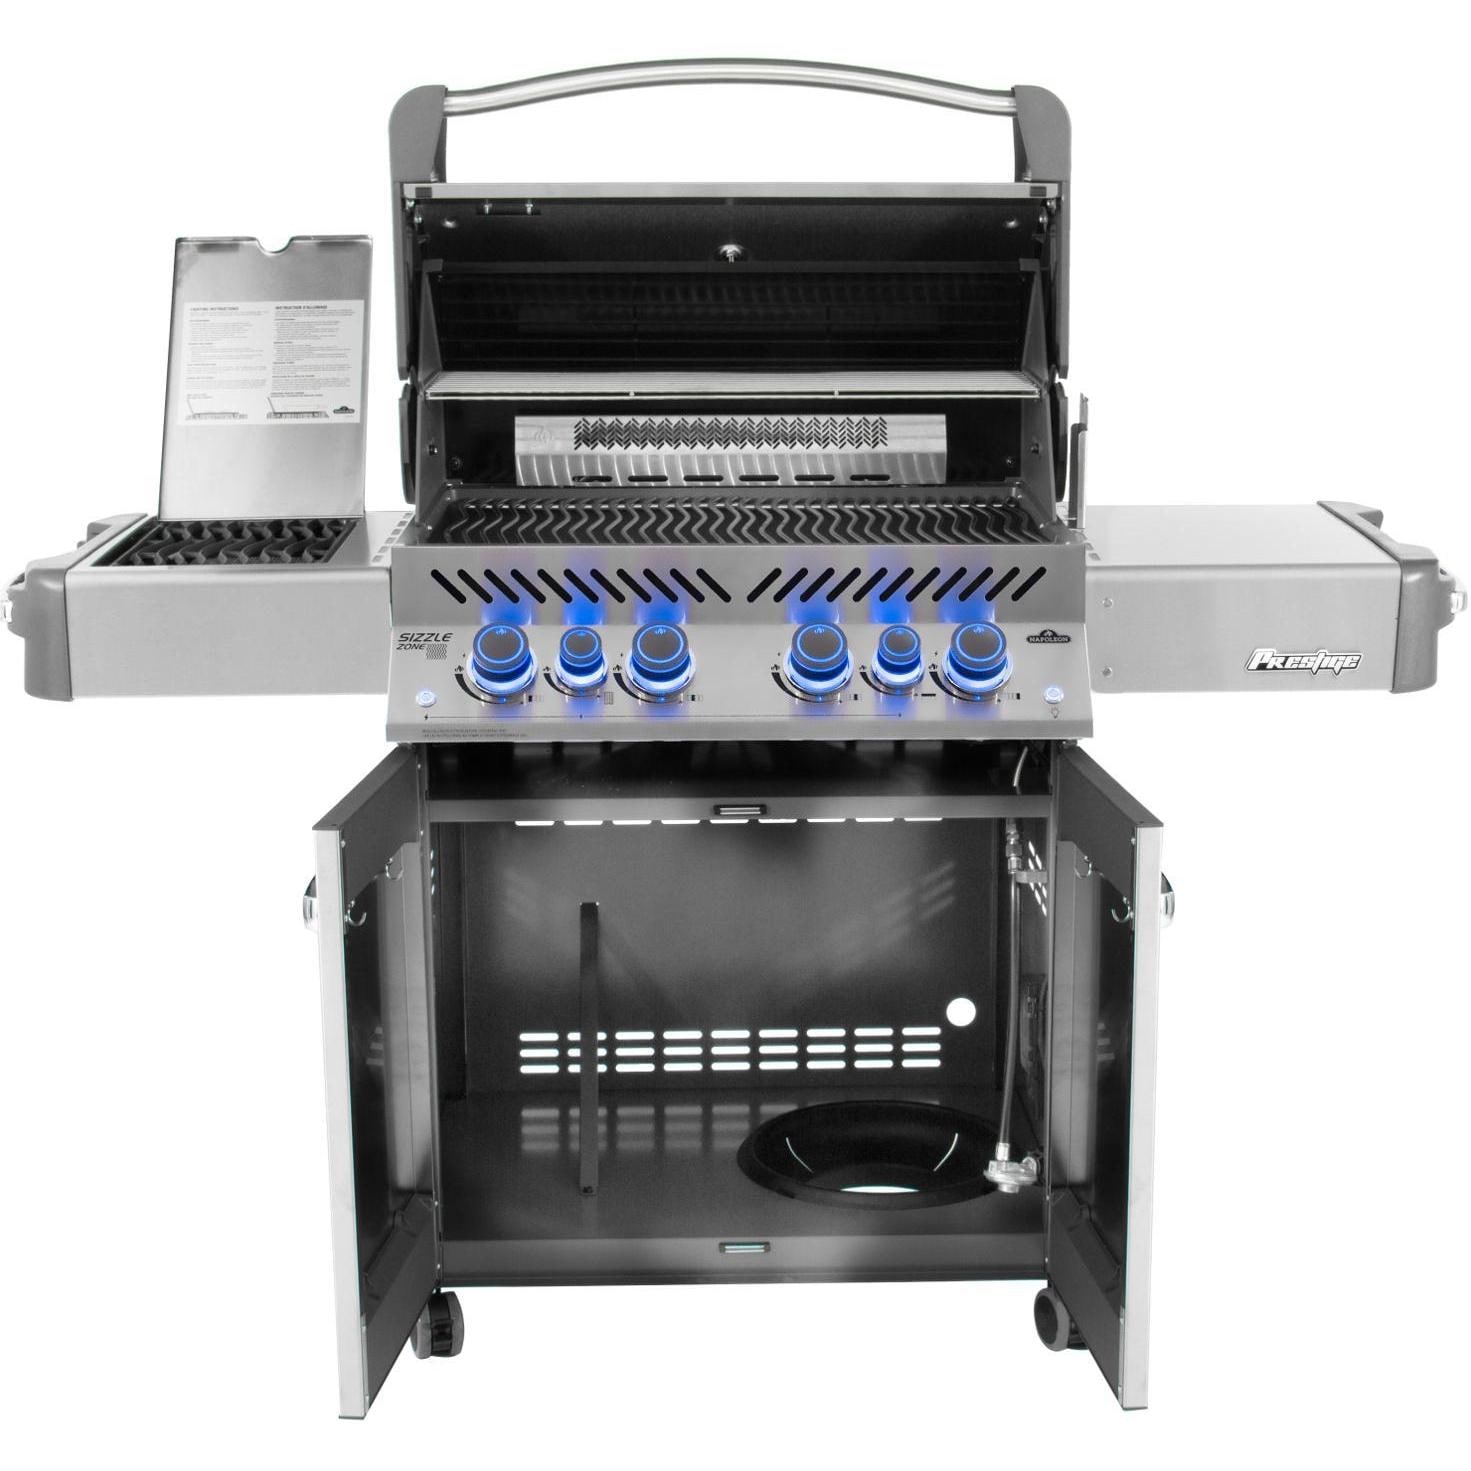 Napoleon Prestige 500 Propane Gas Grill With Infrared Rear Burner And Infrared Side Burner - image 4 of 6